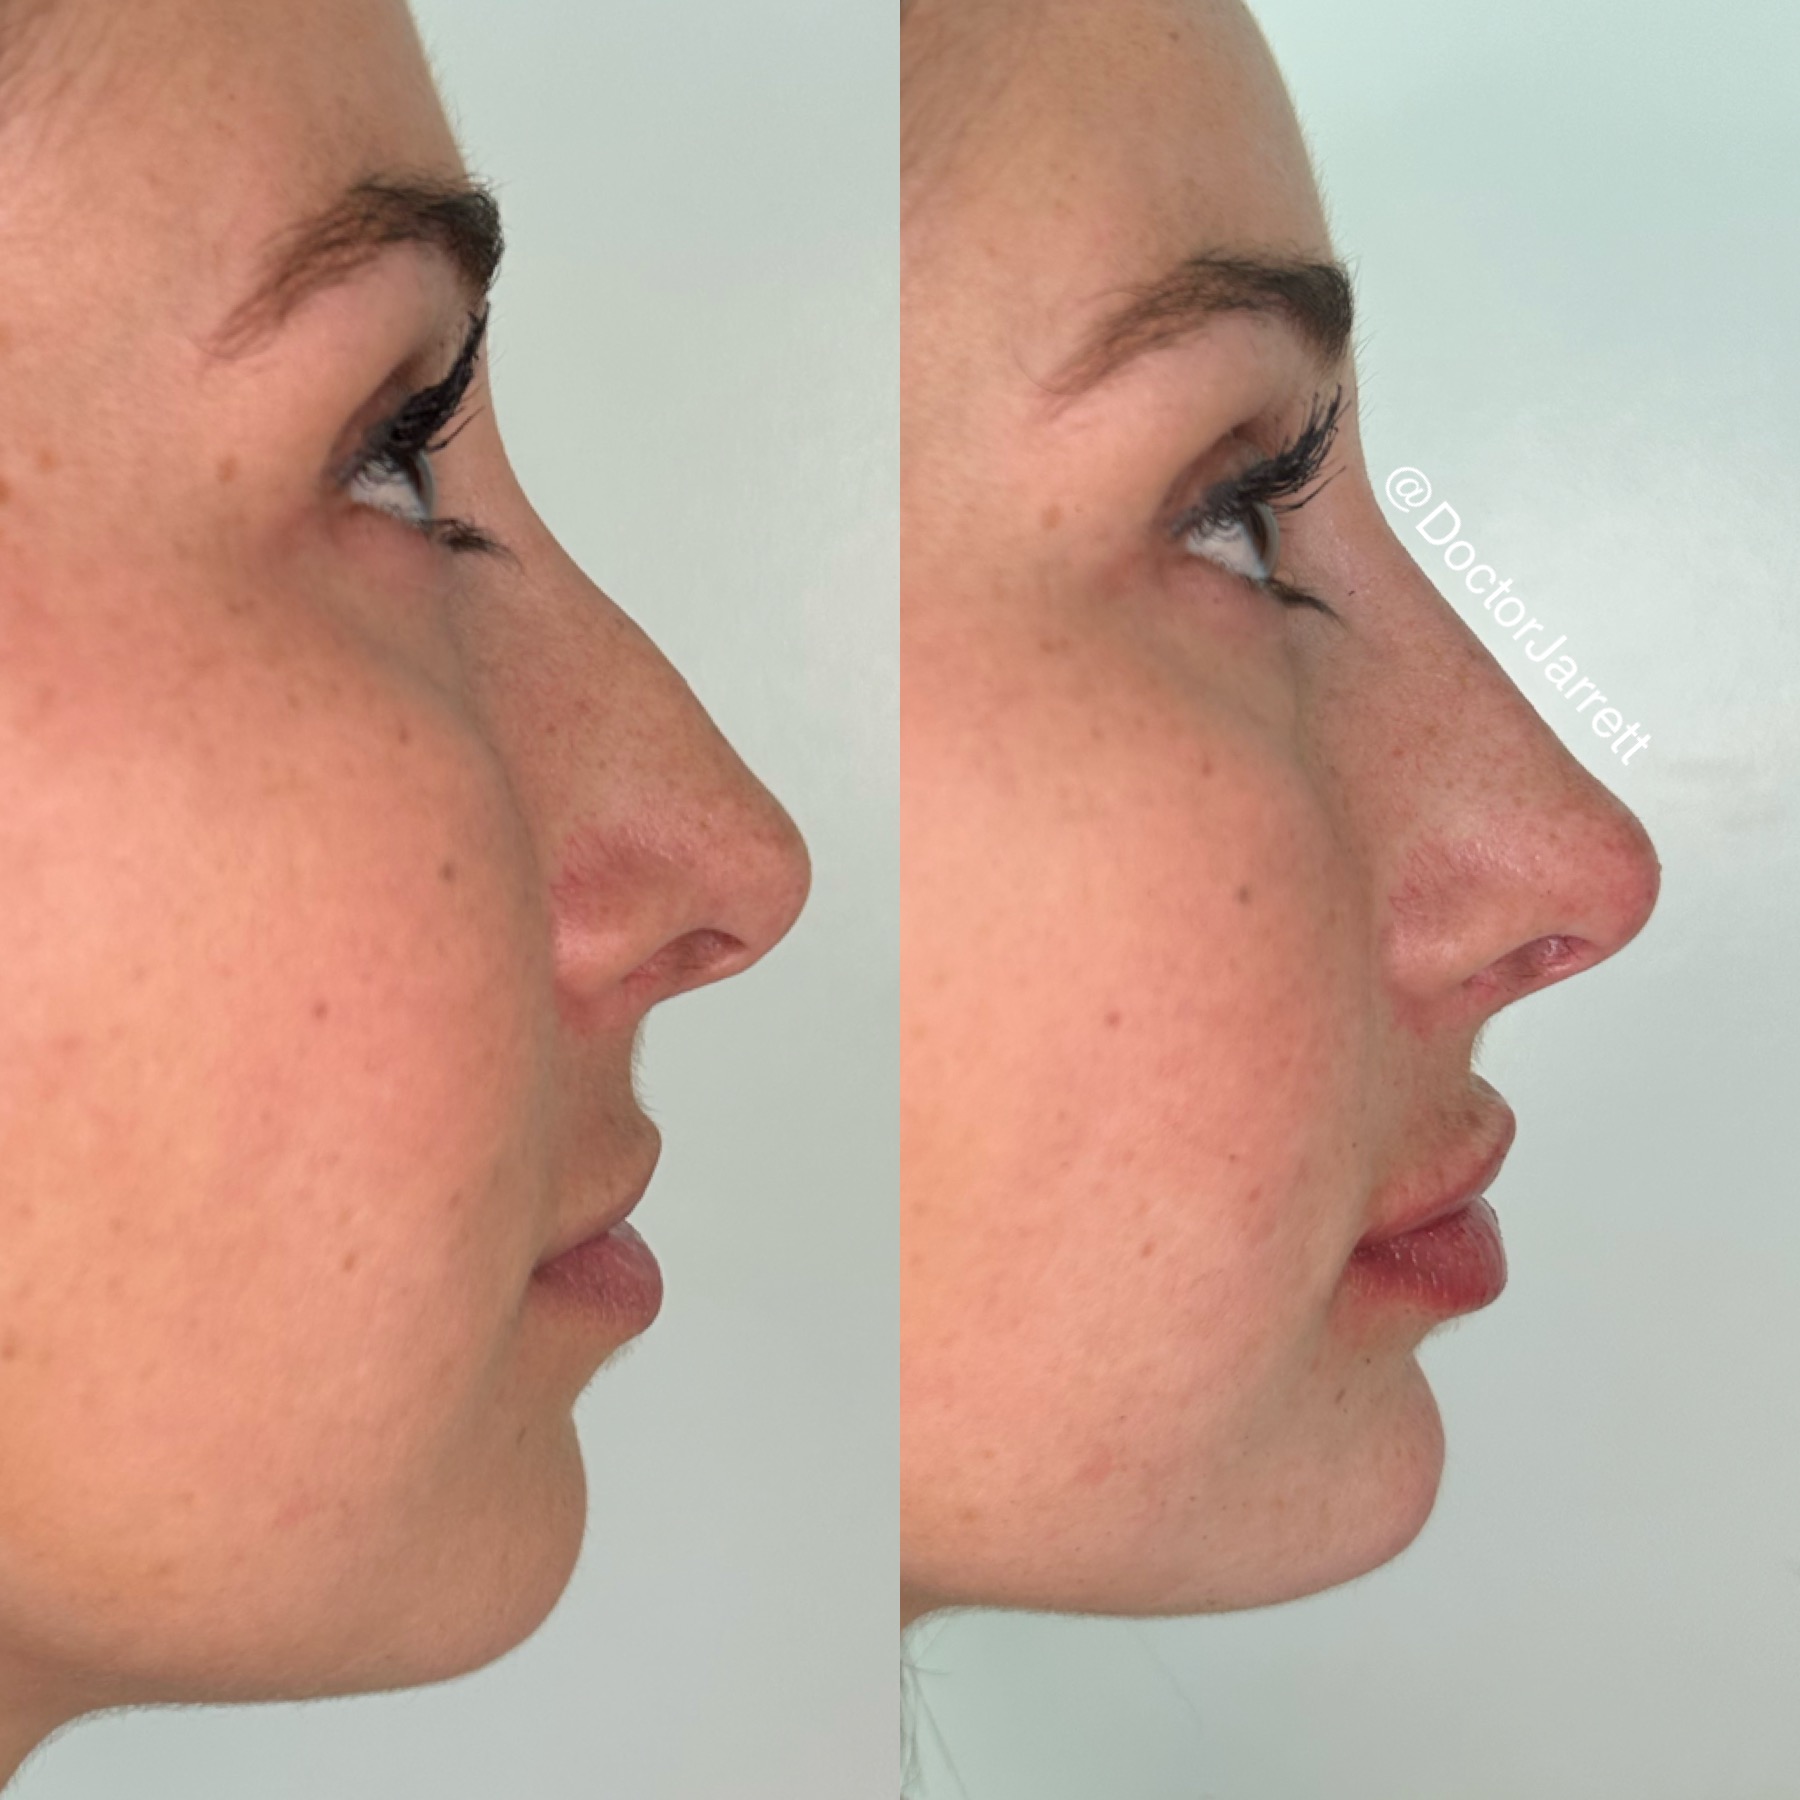 Nonsurgical Rhinoplasty nose nose job injector injecting fillers botox no surgery best nose job americas top 100 injector doctor miami new york brickell south beach soho miami beach med spa aesthetics beauty transformation injection liquid nose job